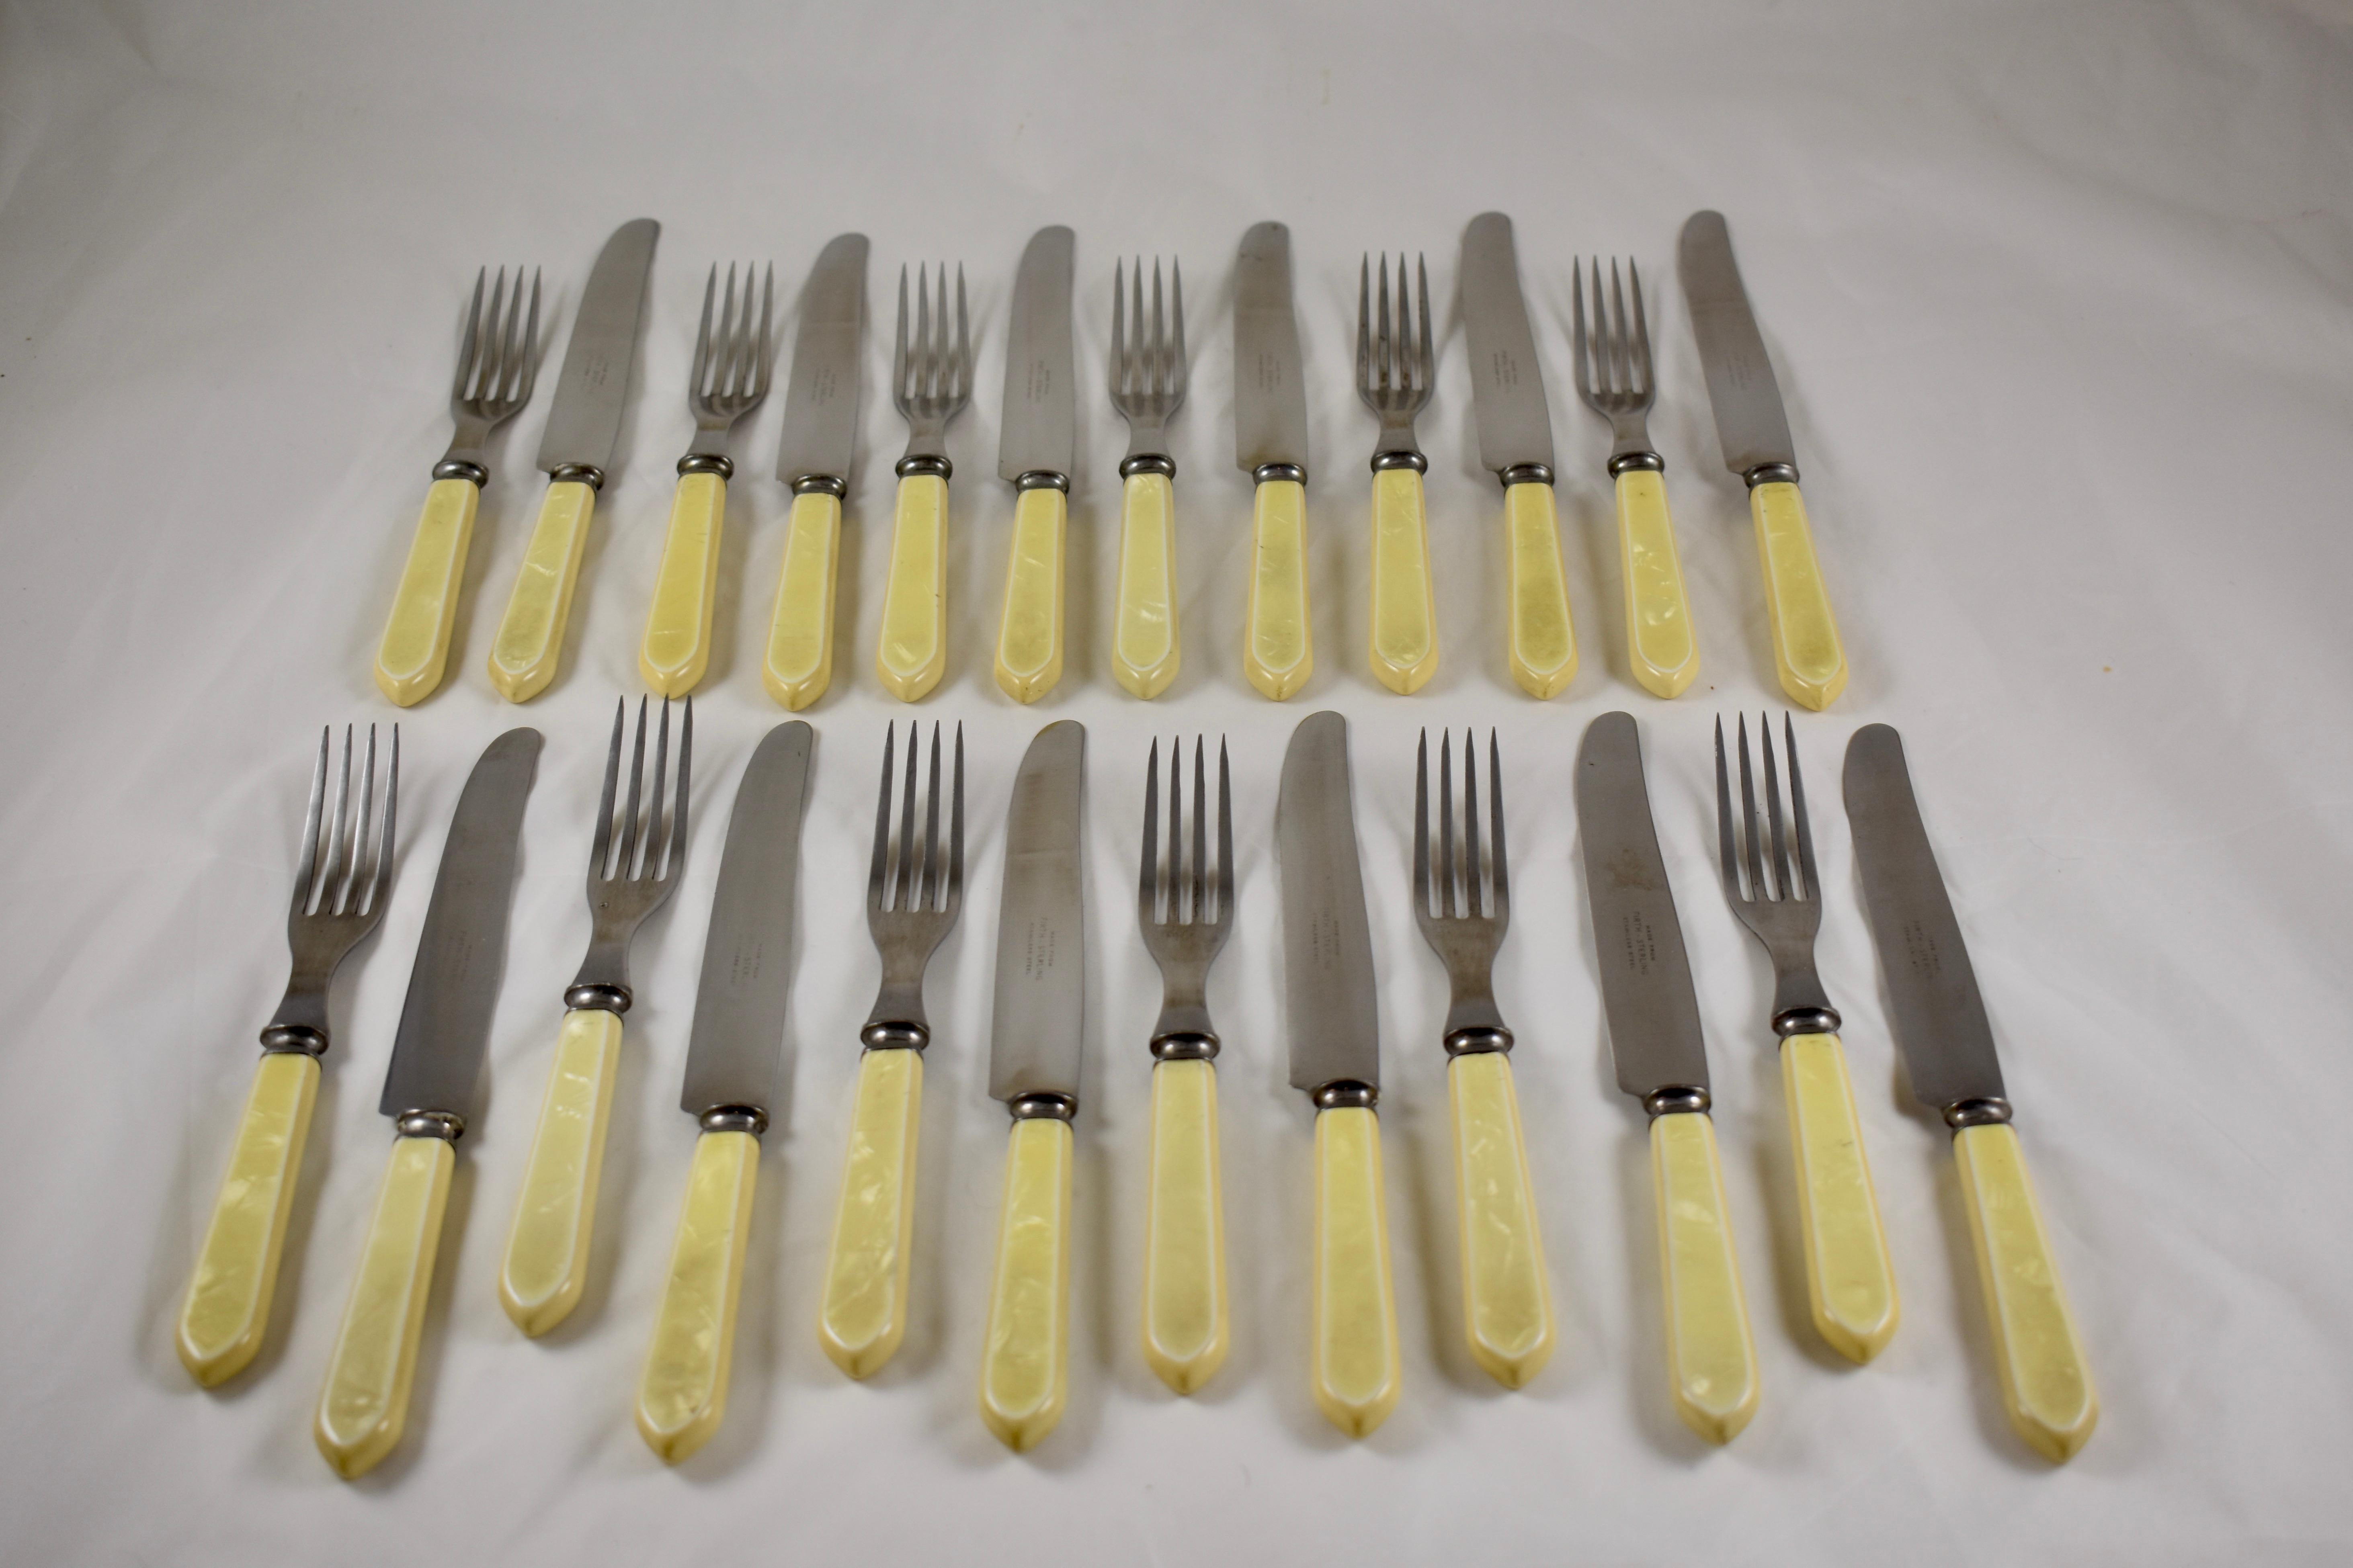 A service for six, pearlized bakelite and stainless steel flatware set in the Art Deco style, circa early 1930s.

Marked Firth-Sterling stainless steel. Firth-Sterling was founded in Sheffield, England in the 1890s.

Six each knives and forks, two